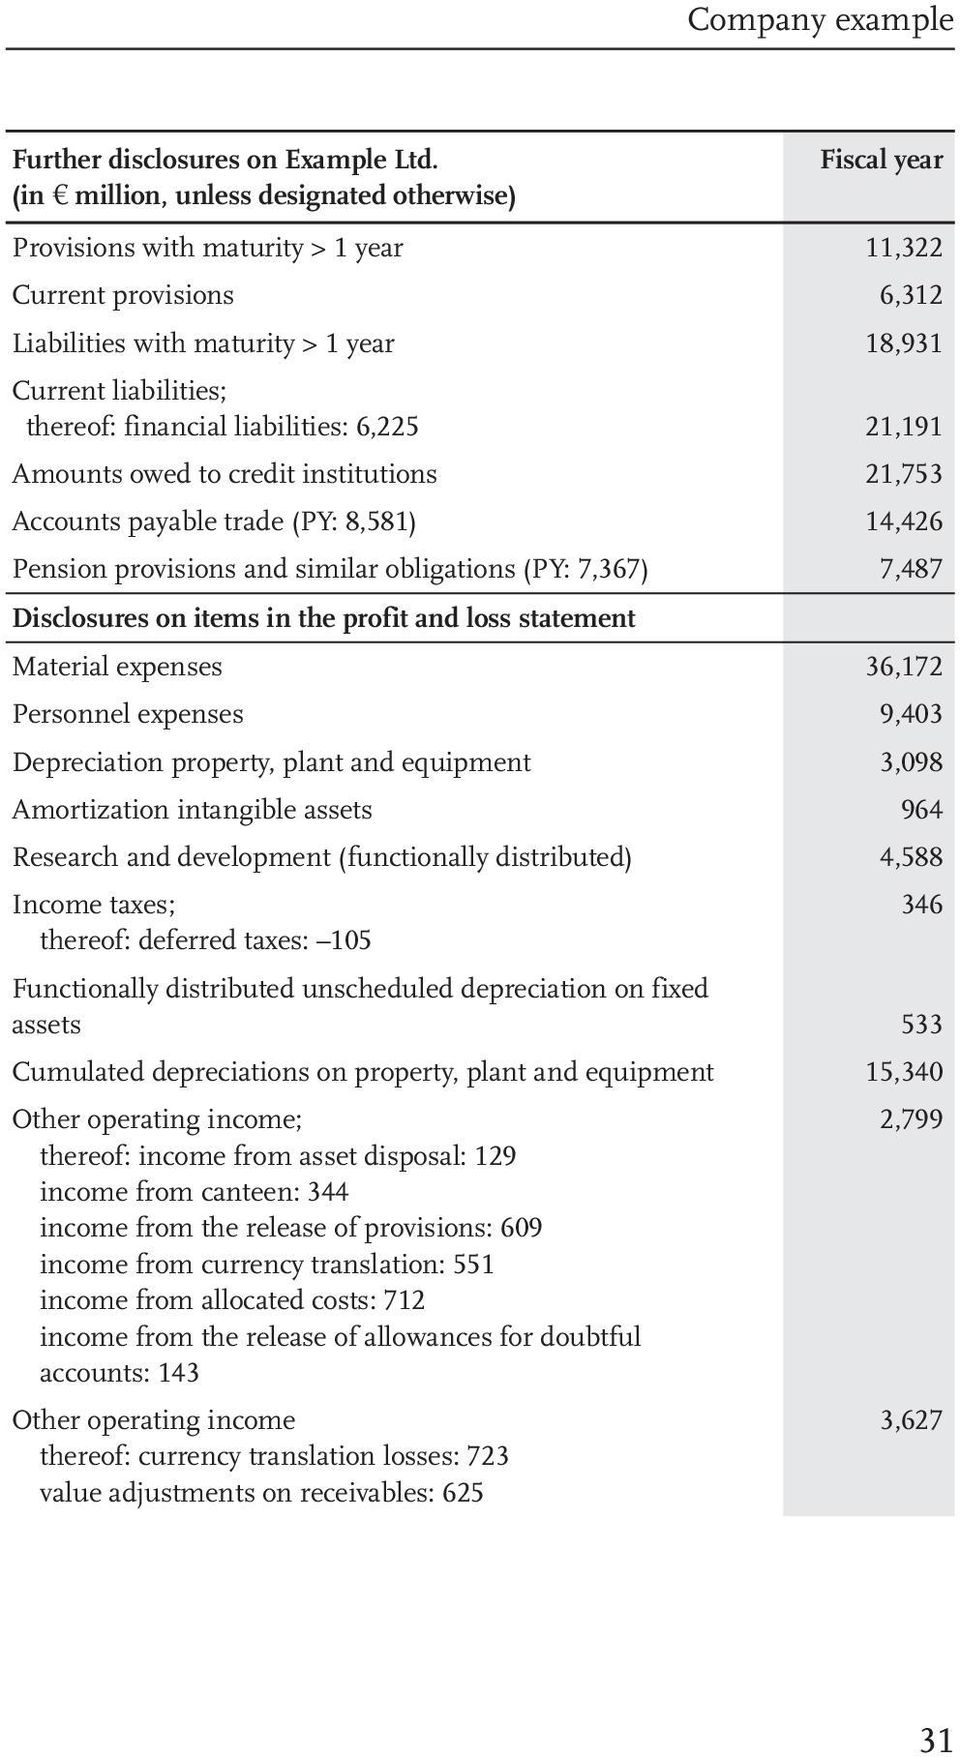 financial liabilities: 6,225 21,191 Amounts owed to credit institutions 21,753 Accounts payable trade (PY: 8,581) 14,426 Pension provisions and similar obligations (PY: 7,367) 7,487 Disclosures on